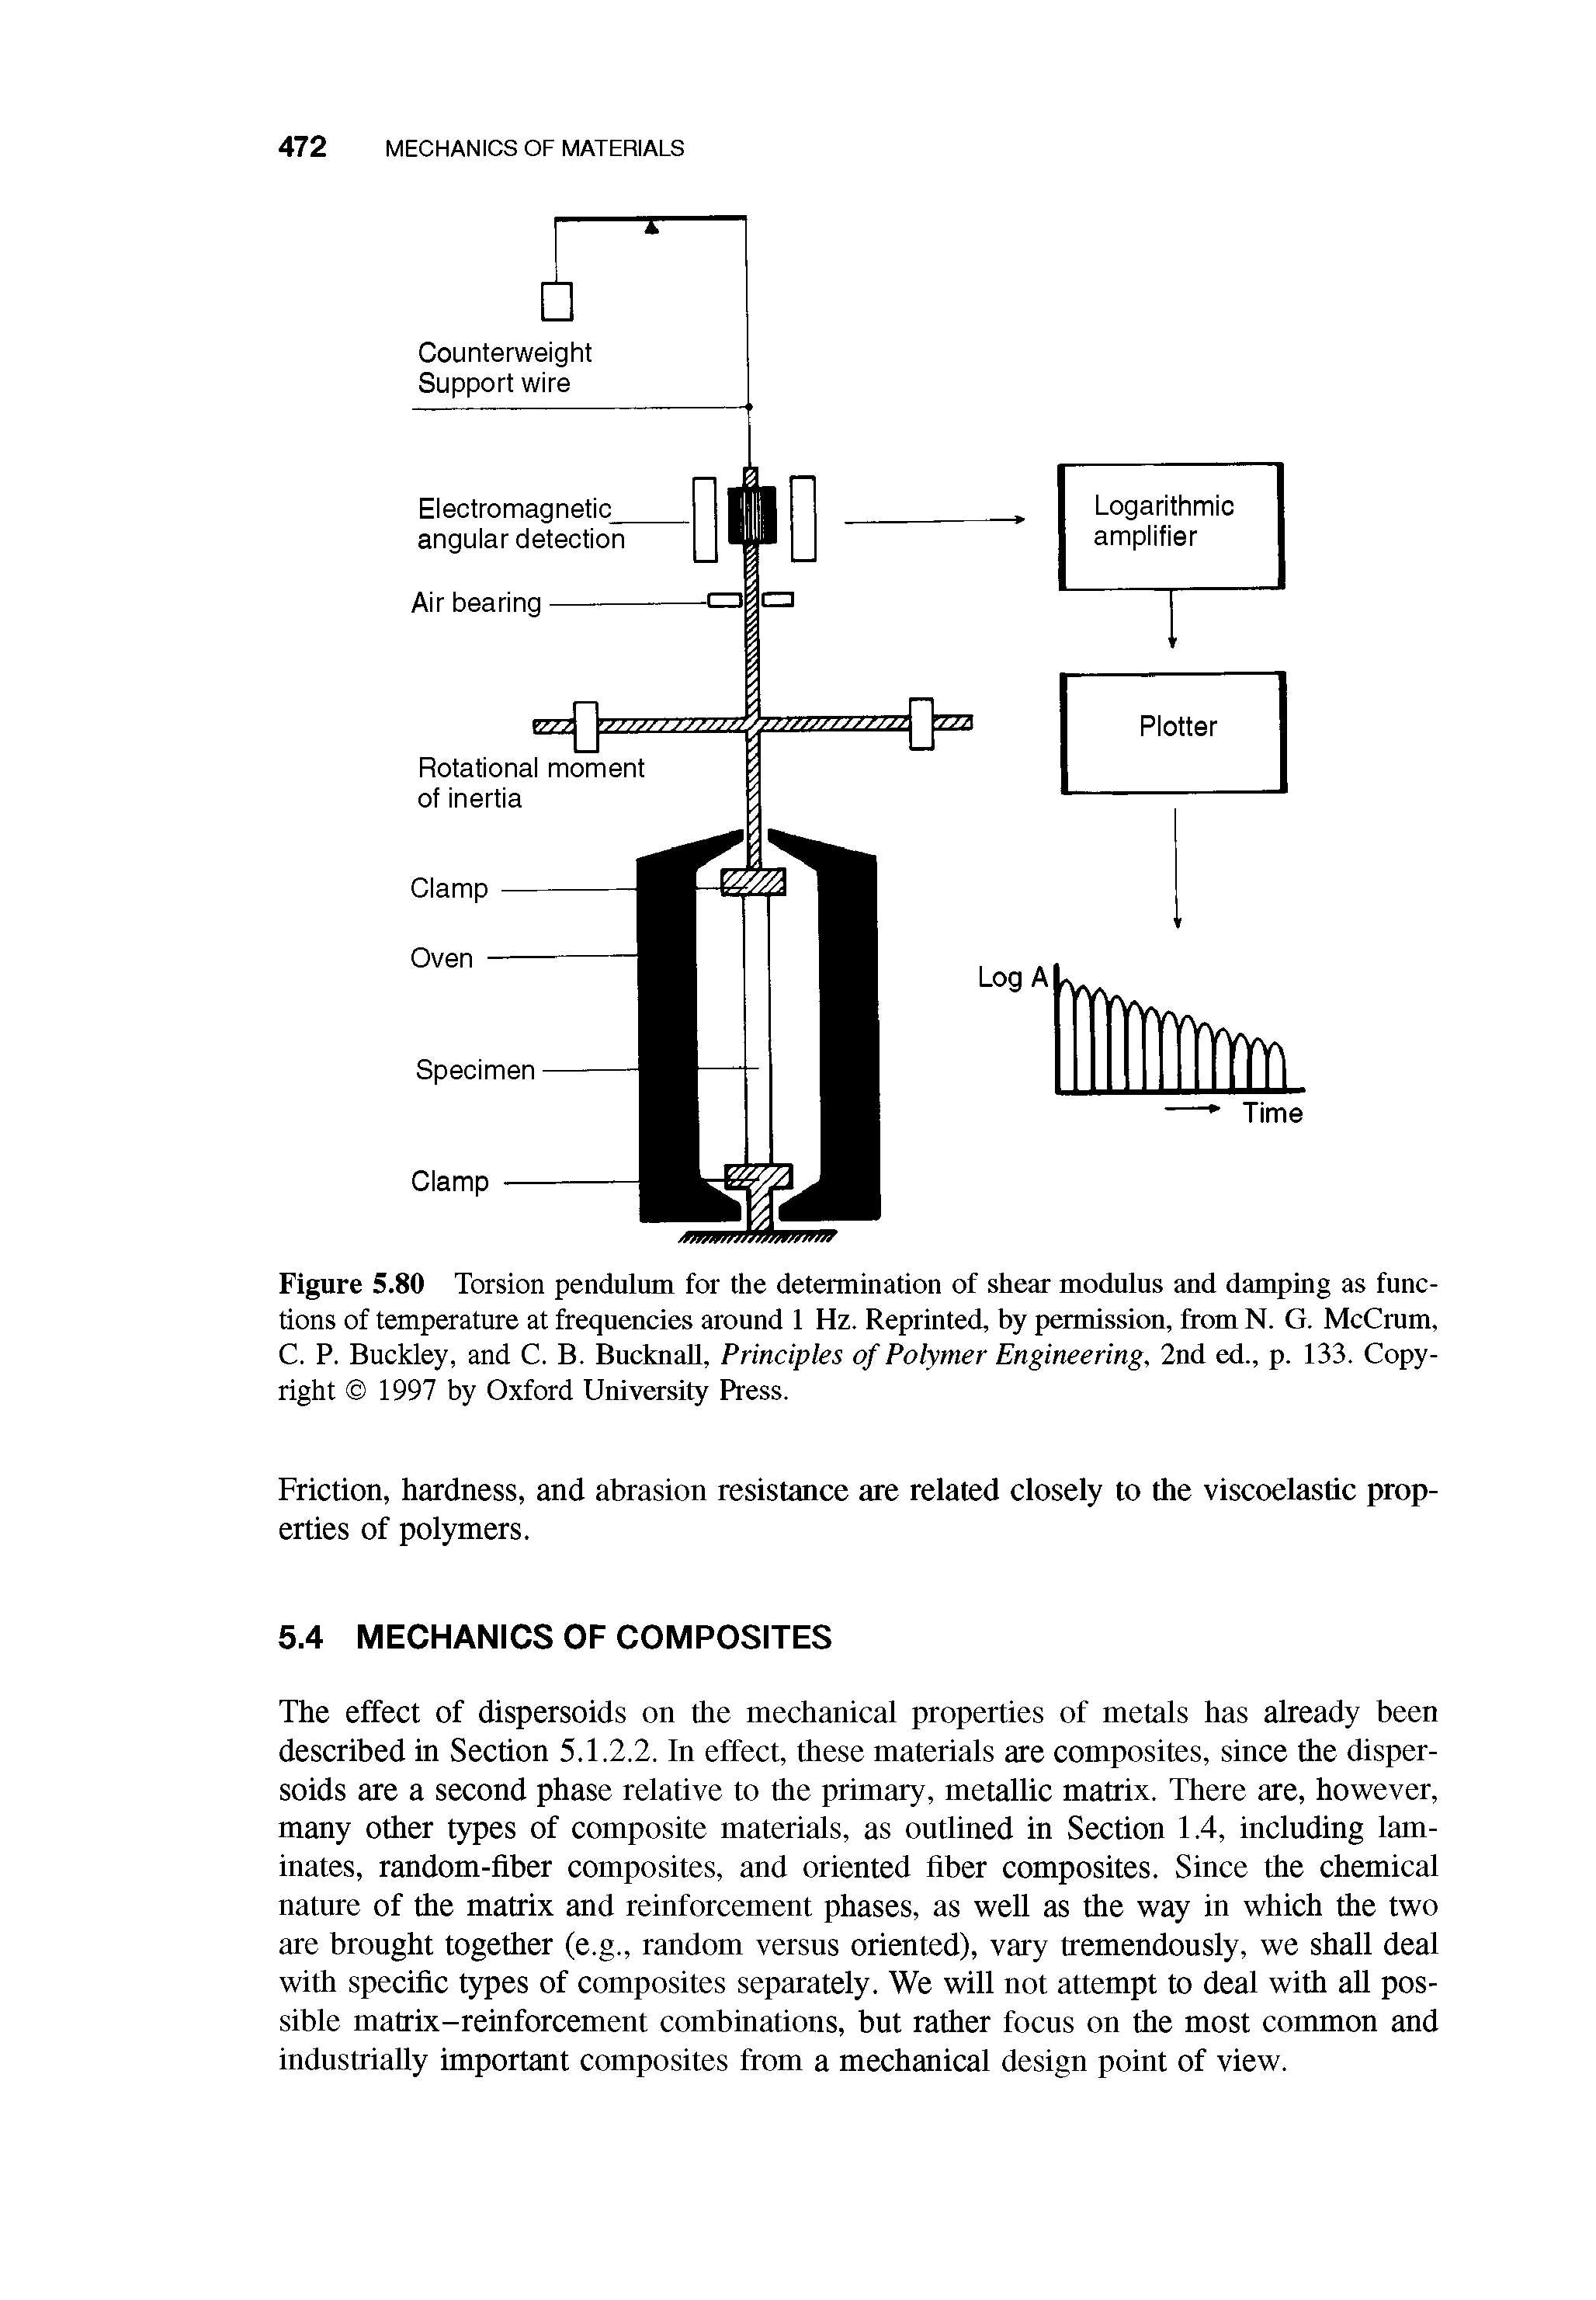 Figure 5.80 Torsion pendulum for the determination of shear modulus aud damping as functions of temperature at frequencies around 1 Hz. Reprinted, by permission, from N. G. McCrum, C. P. Buckley, and C. B. BucknaU, Principles of Polymer Engineering, 2nd ed., p. 133. Copyright 1997 by Oxford University Press.